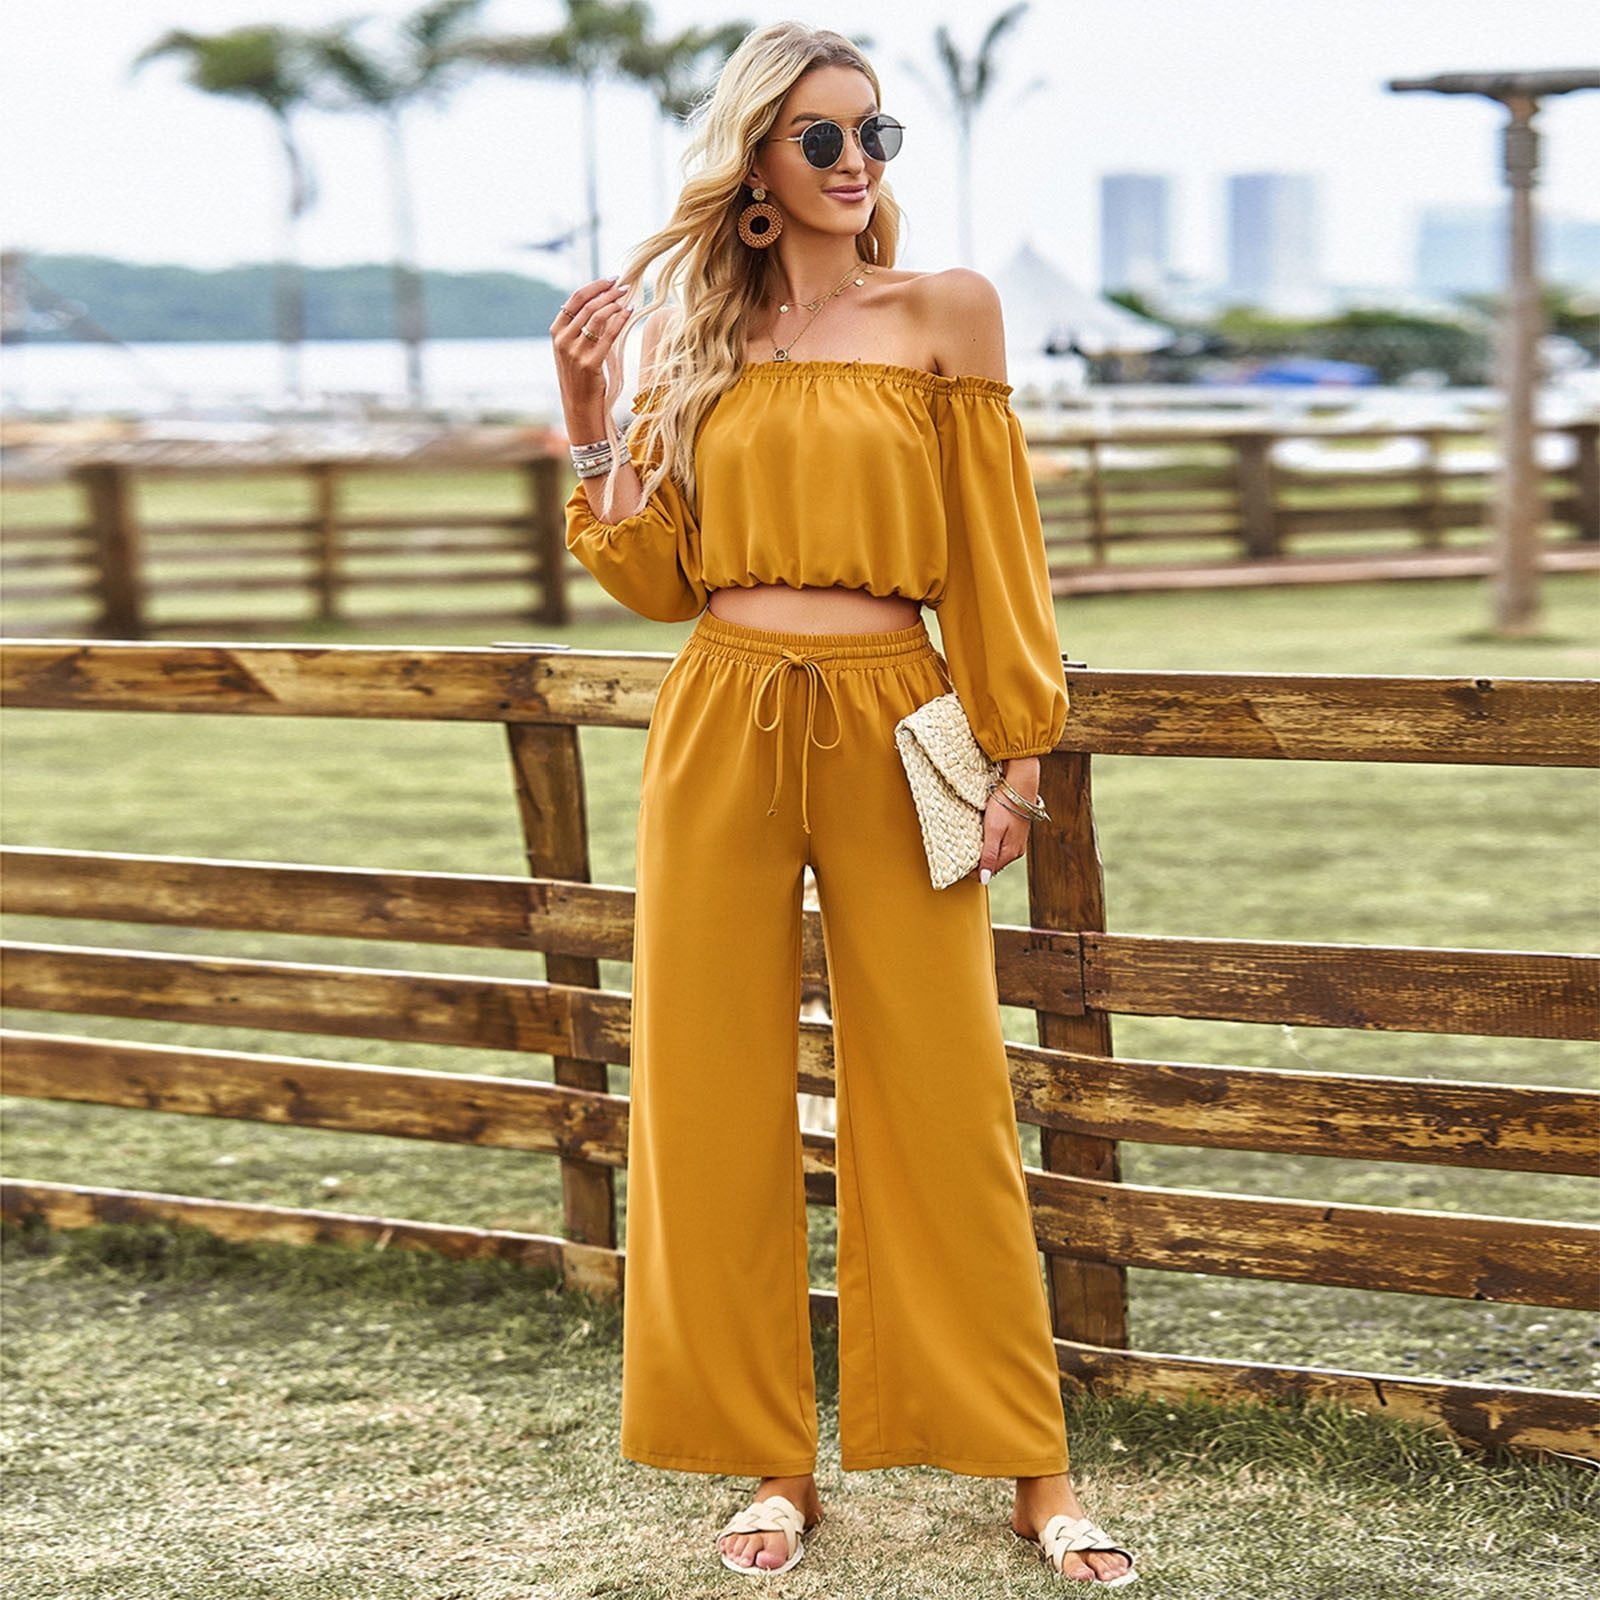 JNGSA Women's Formal Two Piece Outfits Casual Summer Solid Color  Off-Shoulder Tops + Drawstring Pants Evening Party Sets Yellow 6